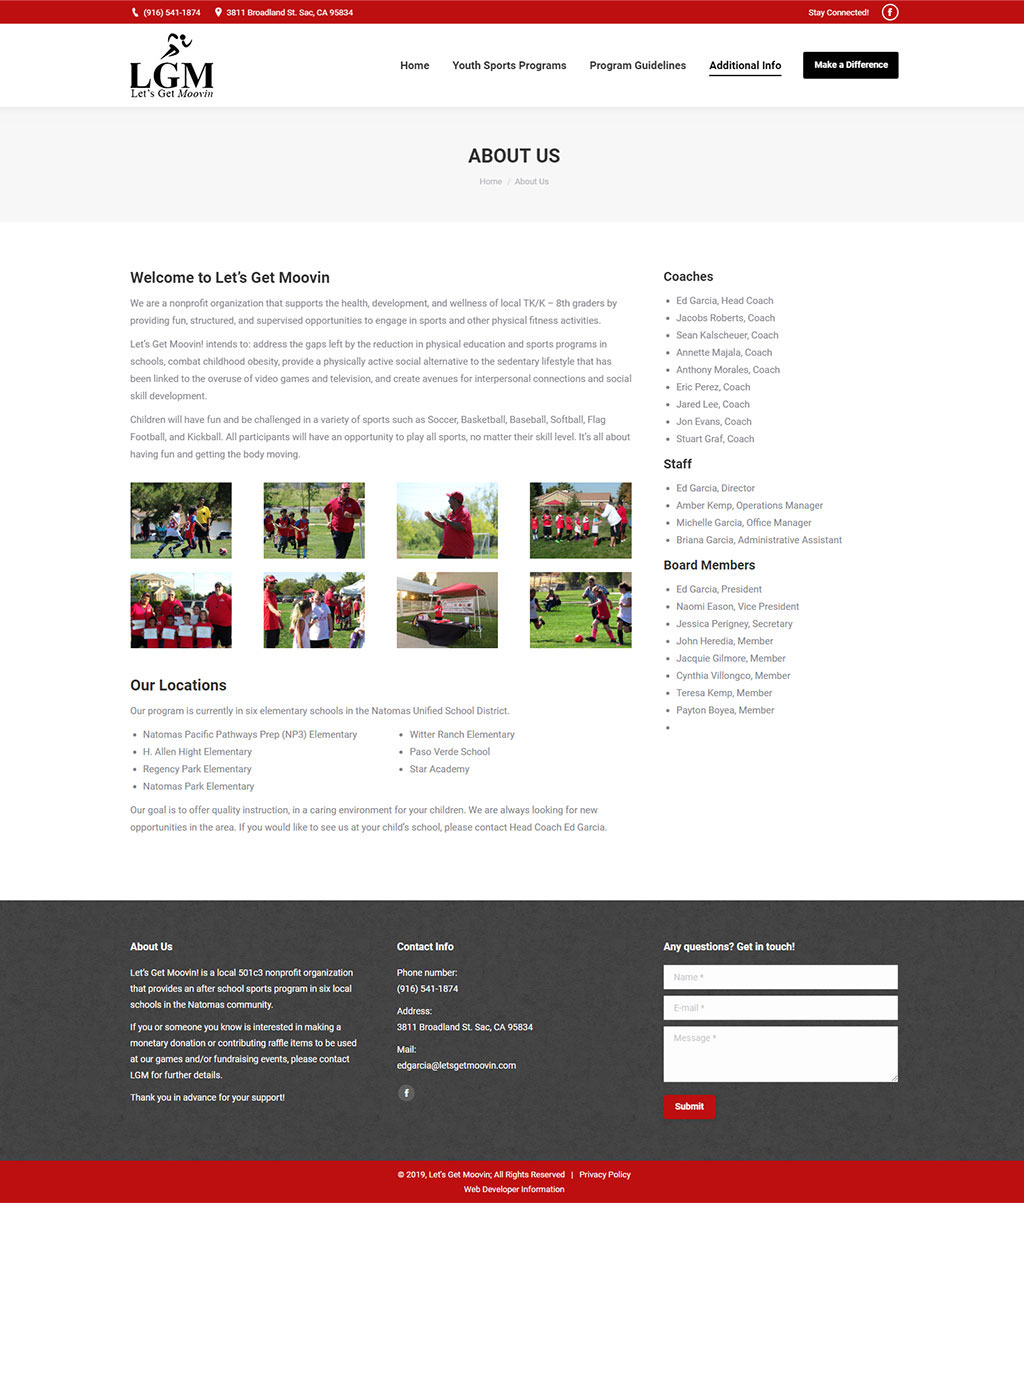 About us page developed for Sacramento youth sports website